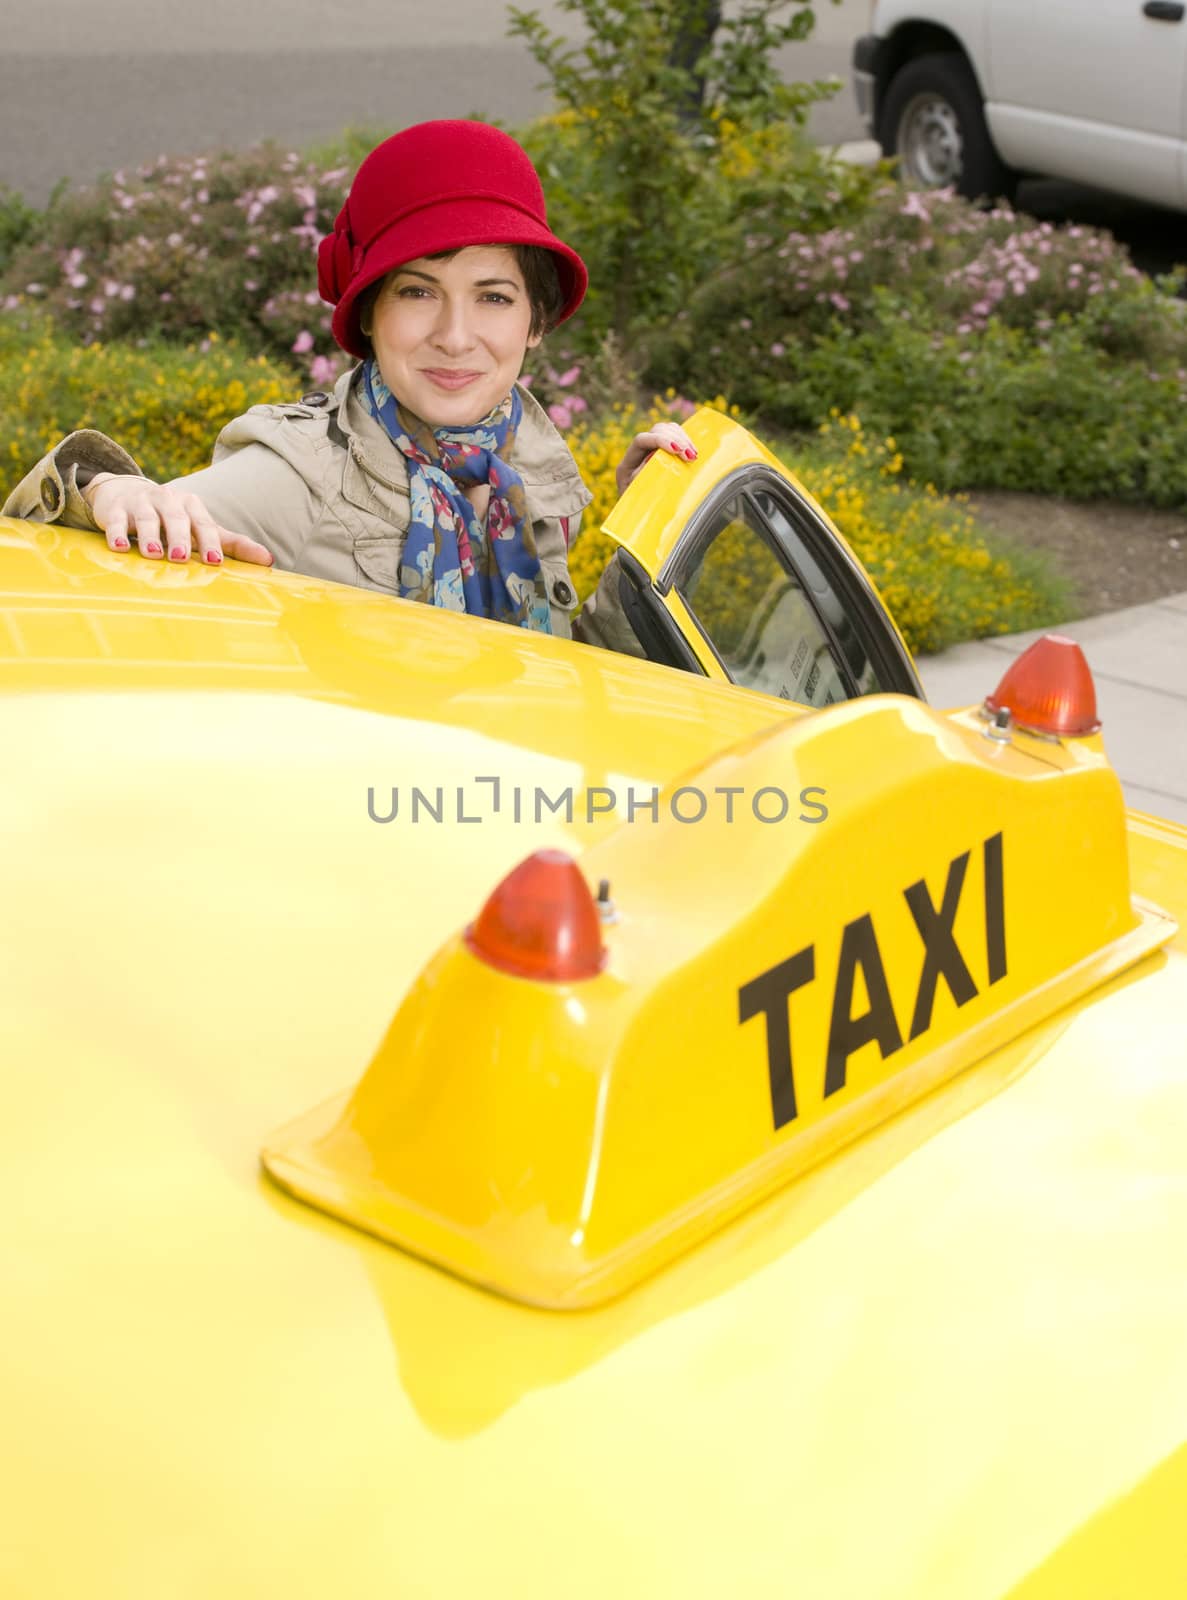 Woman enters a Taxi by ChrisBoswell